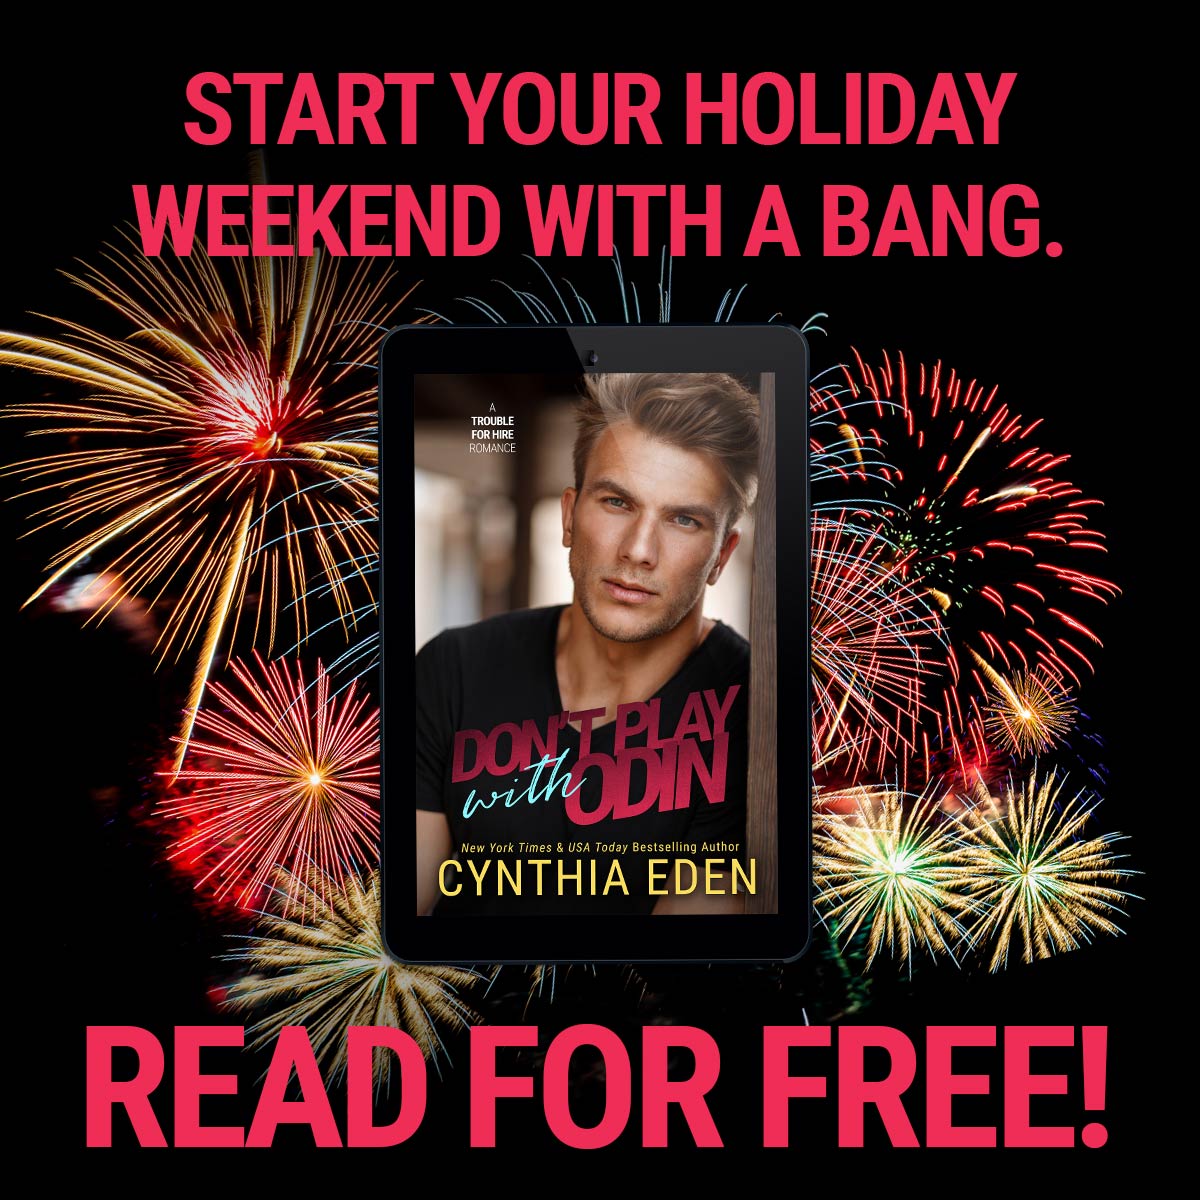 Start your holiday weekend with a bang! Read DON'T PLAY WITH ODIN for free!